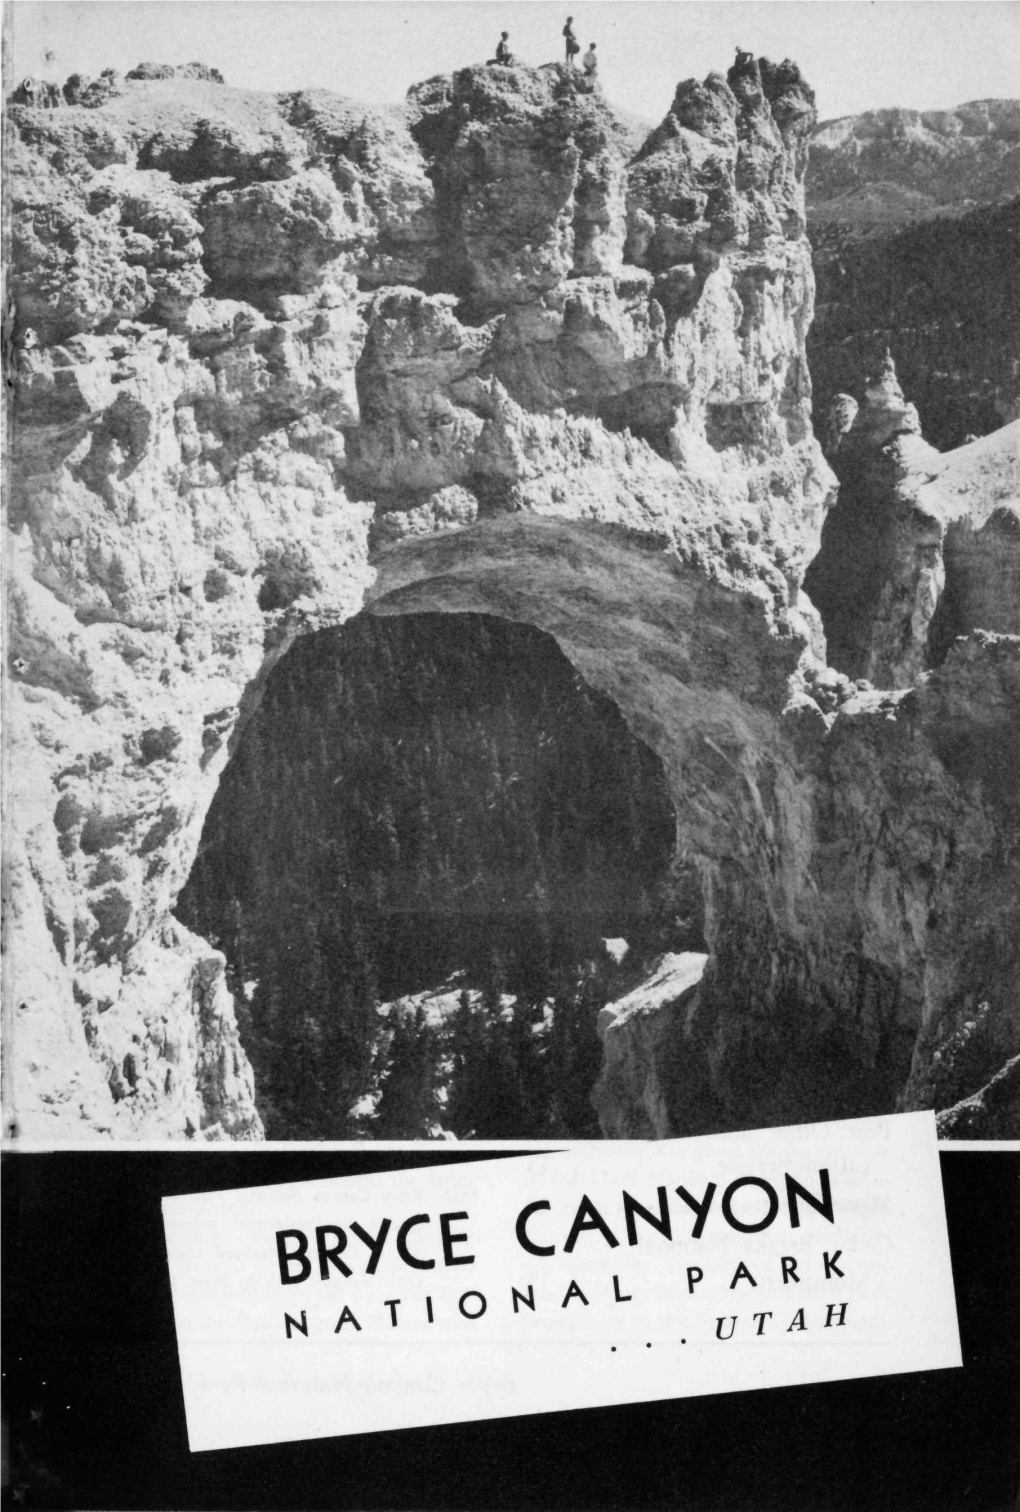 Bryce Canyon Visited by A